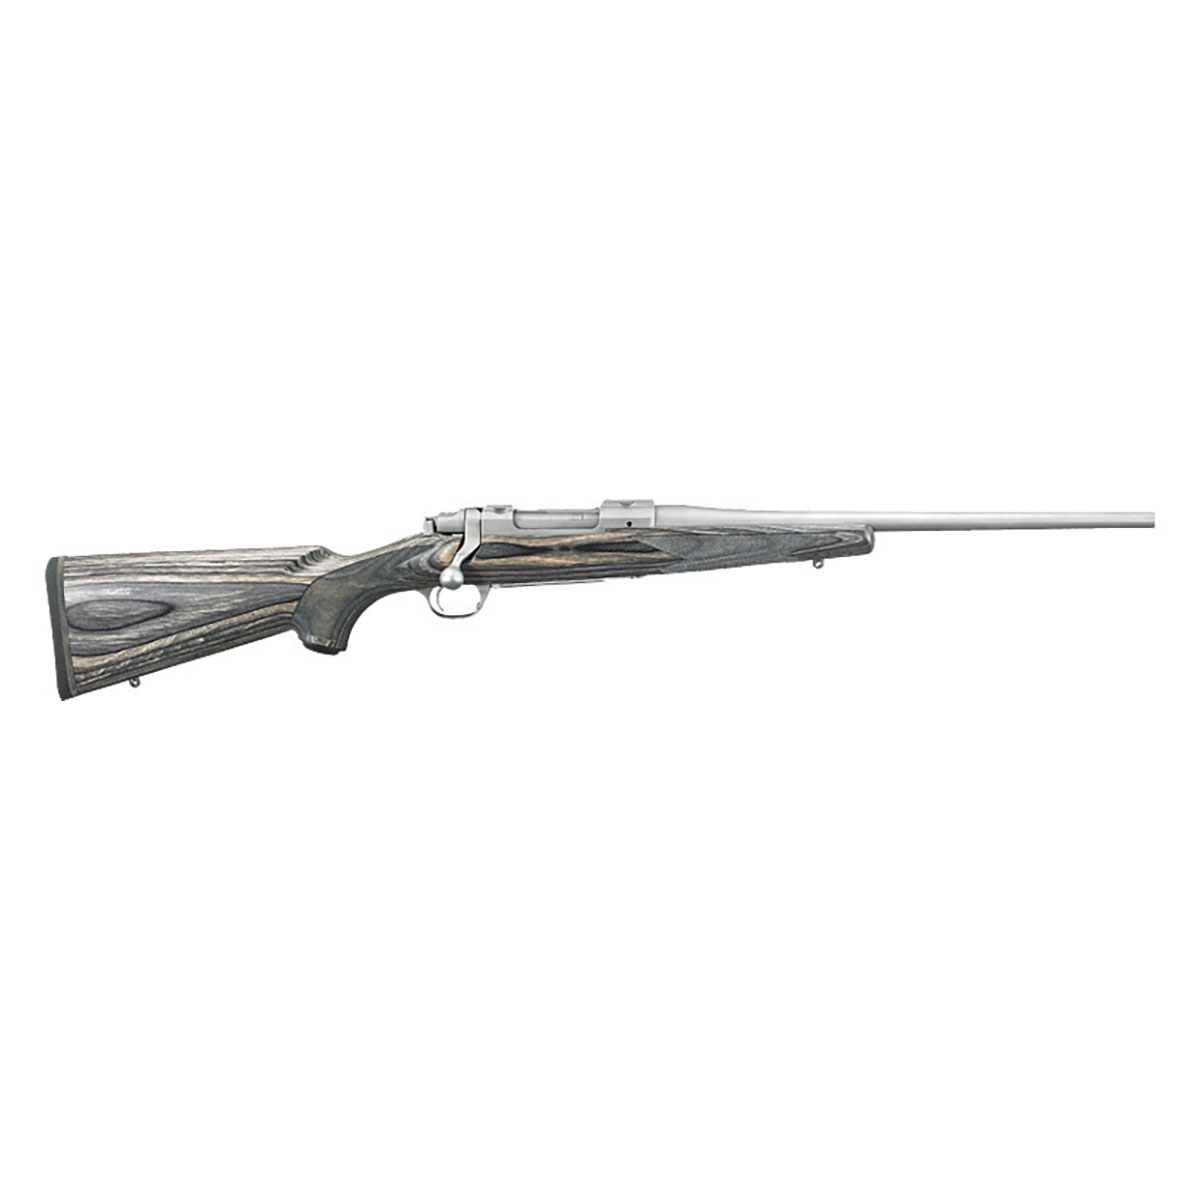 RUGER - HAWKEYE LAMINATE COMPACT 308 WINCHESTER BOLT ACTION RIFLE